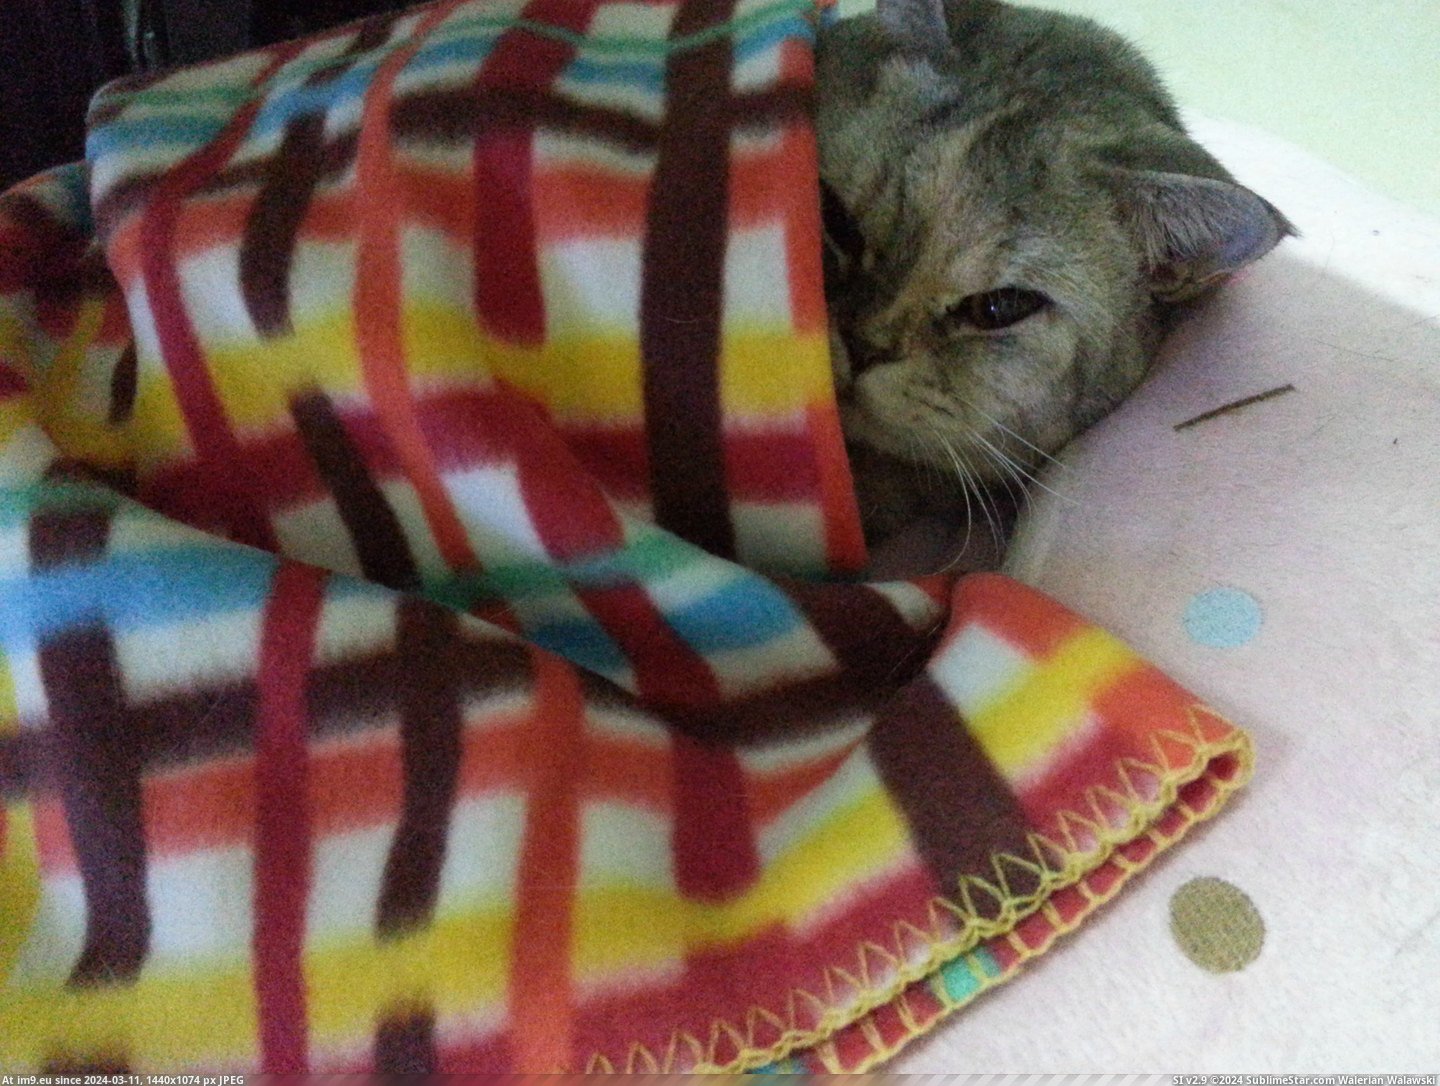 #Cats #Got #Weather #Blanket #Hated #She #Cold [Cats] She hated cold weather so we got her a little blanket 1 Pic. (Изображение из альбом My r/CATS favs))